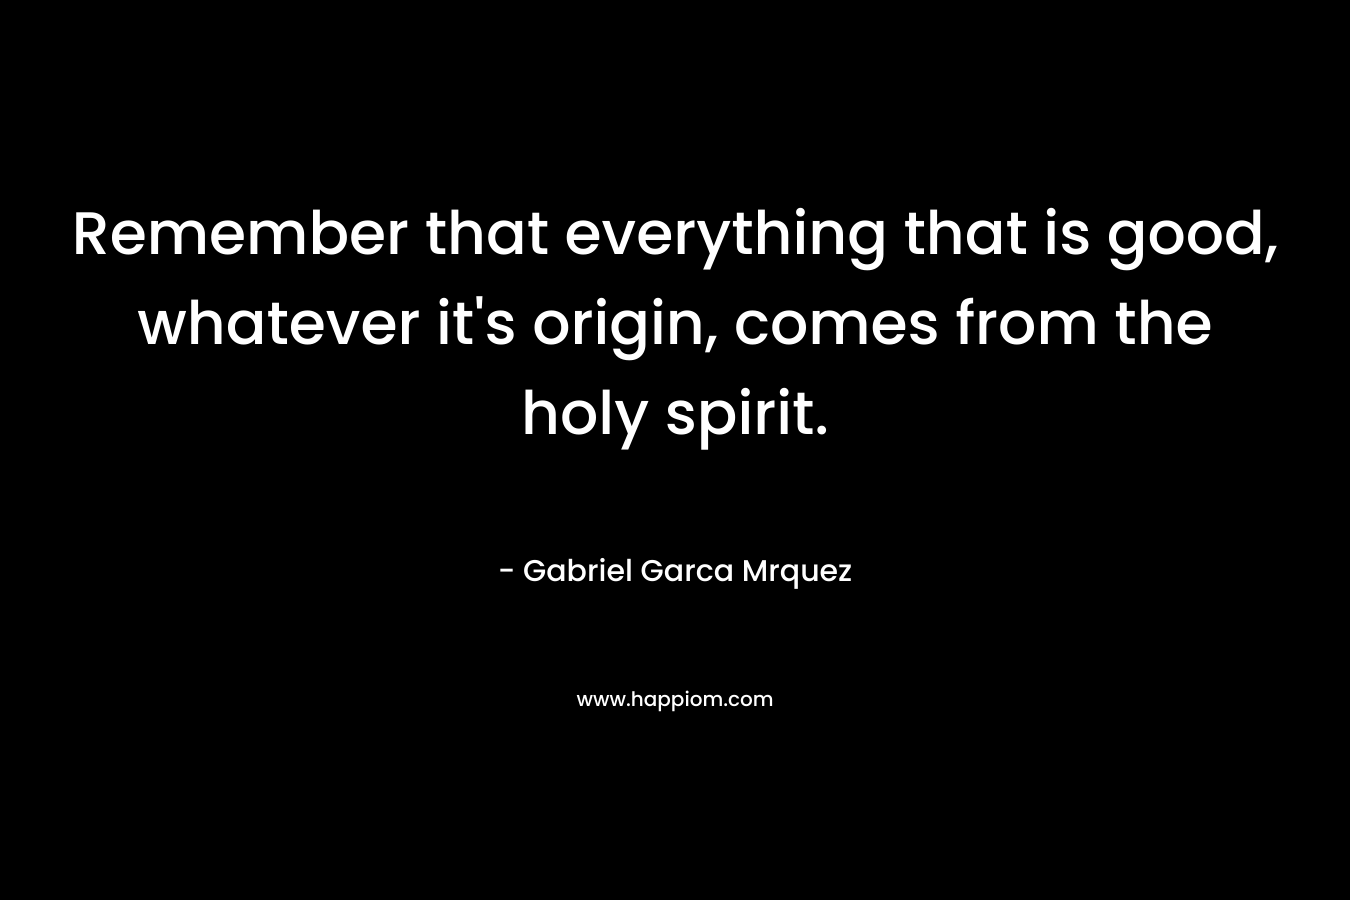 Remember that everything that is good, whatever it’s origin, comes from the holy spirit. – Gabriel Garca Mrquez